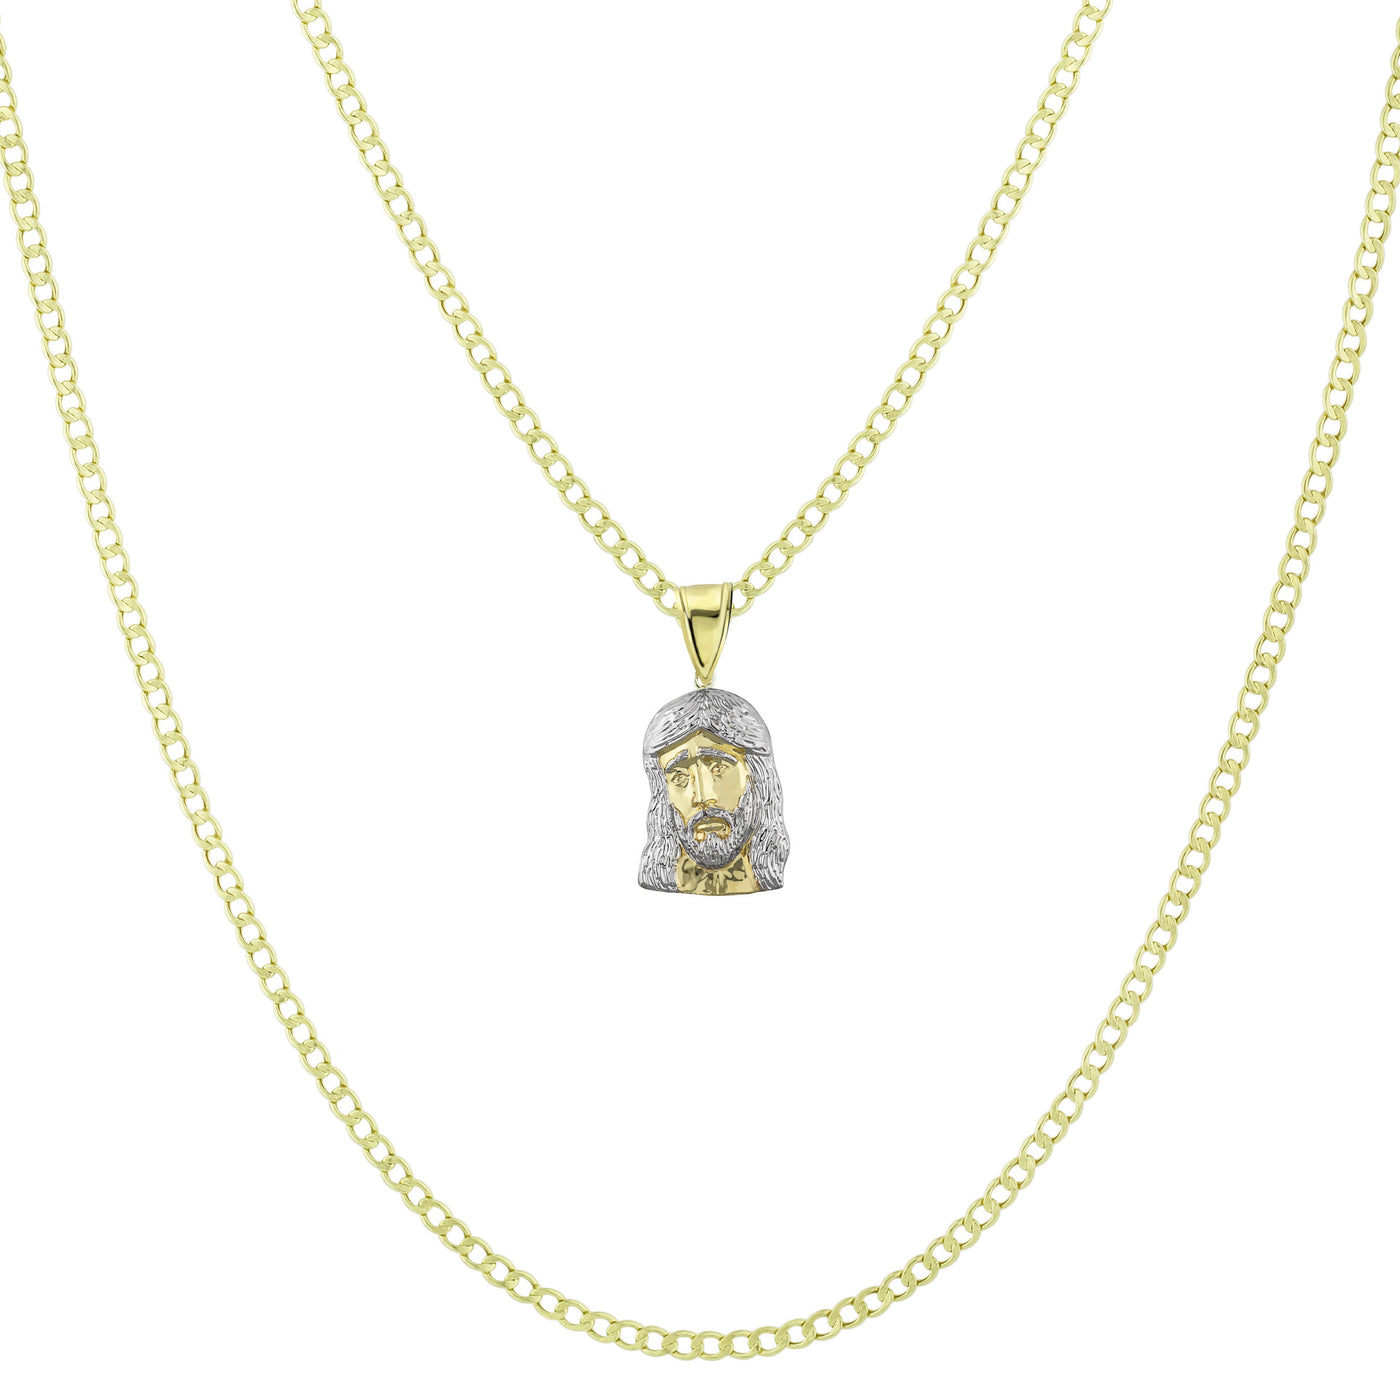 1" Face of Jesus Pendant & Chain Necklace Set 10K Yellow White Gold